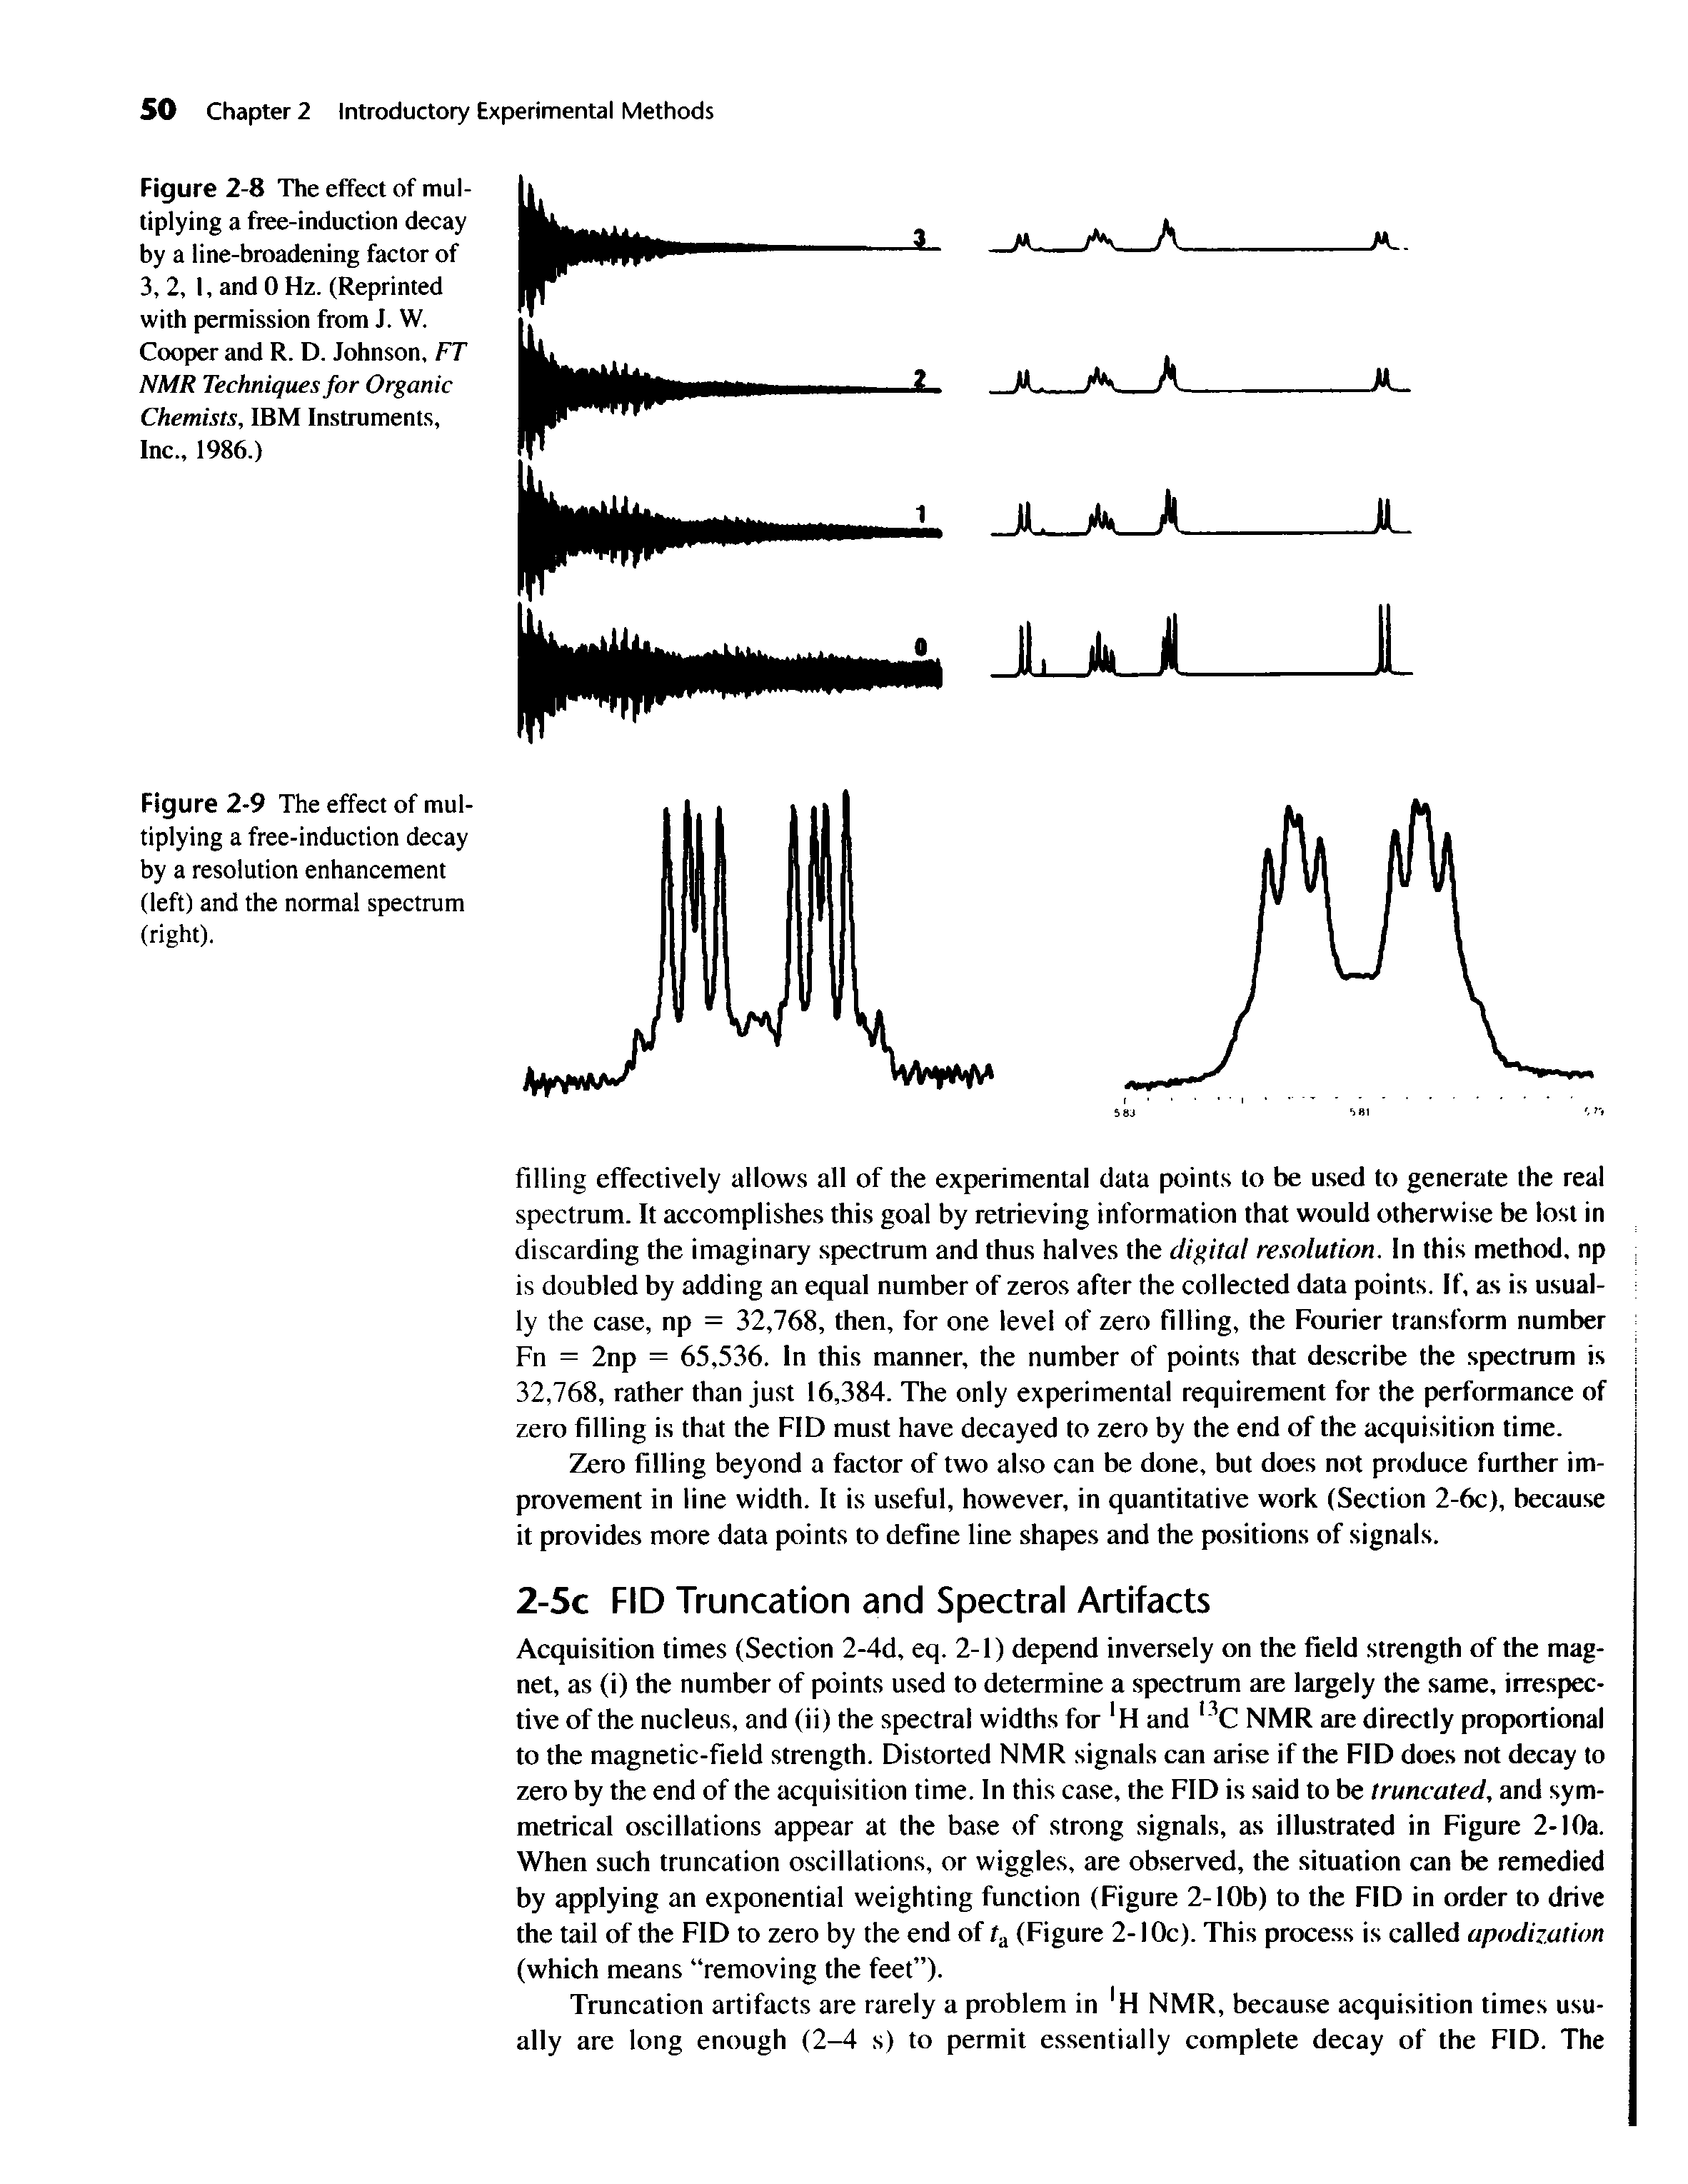 Figure 2-8 The effect of multiplying a free-induction decay by a line-broadening factor of 3, 2, I, and 0 Hz. (Reprinted with permission from J. W. Cooper and R. D. Johnson, FT NMR Techniques for Organic Chemists, IBM Instruments, Inc., 1986.)...